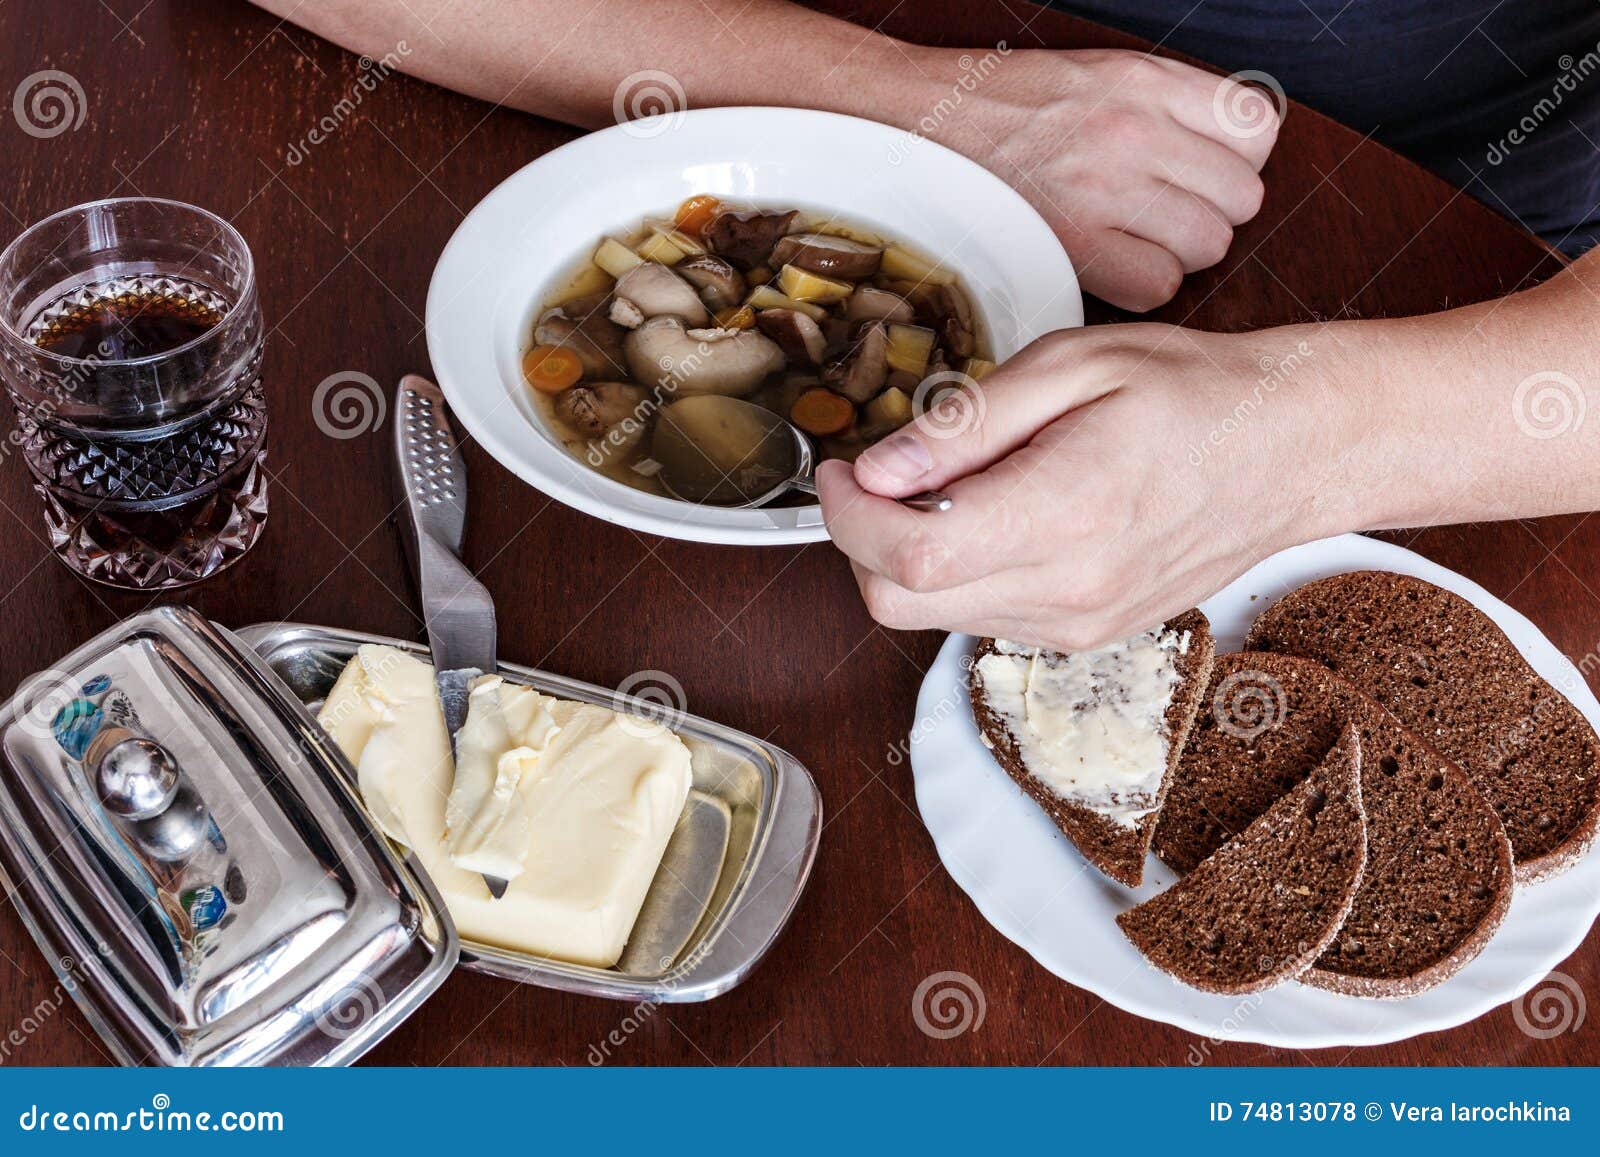 Man Eating Soup With His Left Hand Mushroom Bread Butter Stock Photo Image Of People Sandwich 74813078